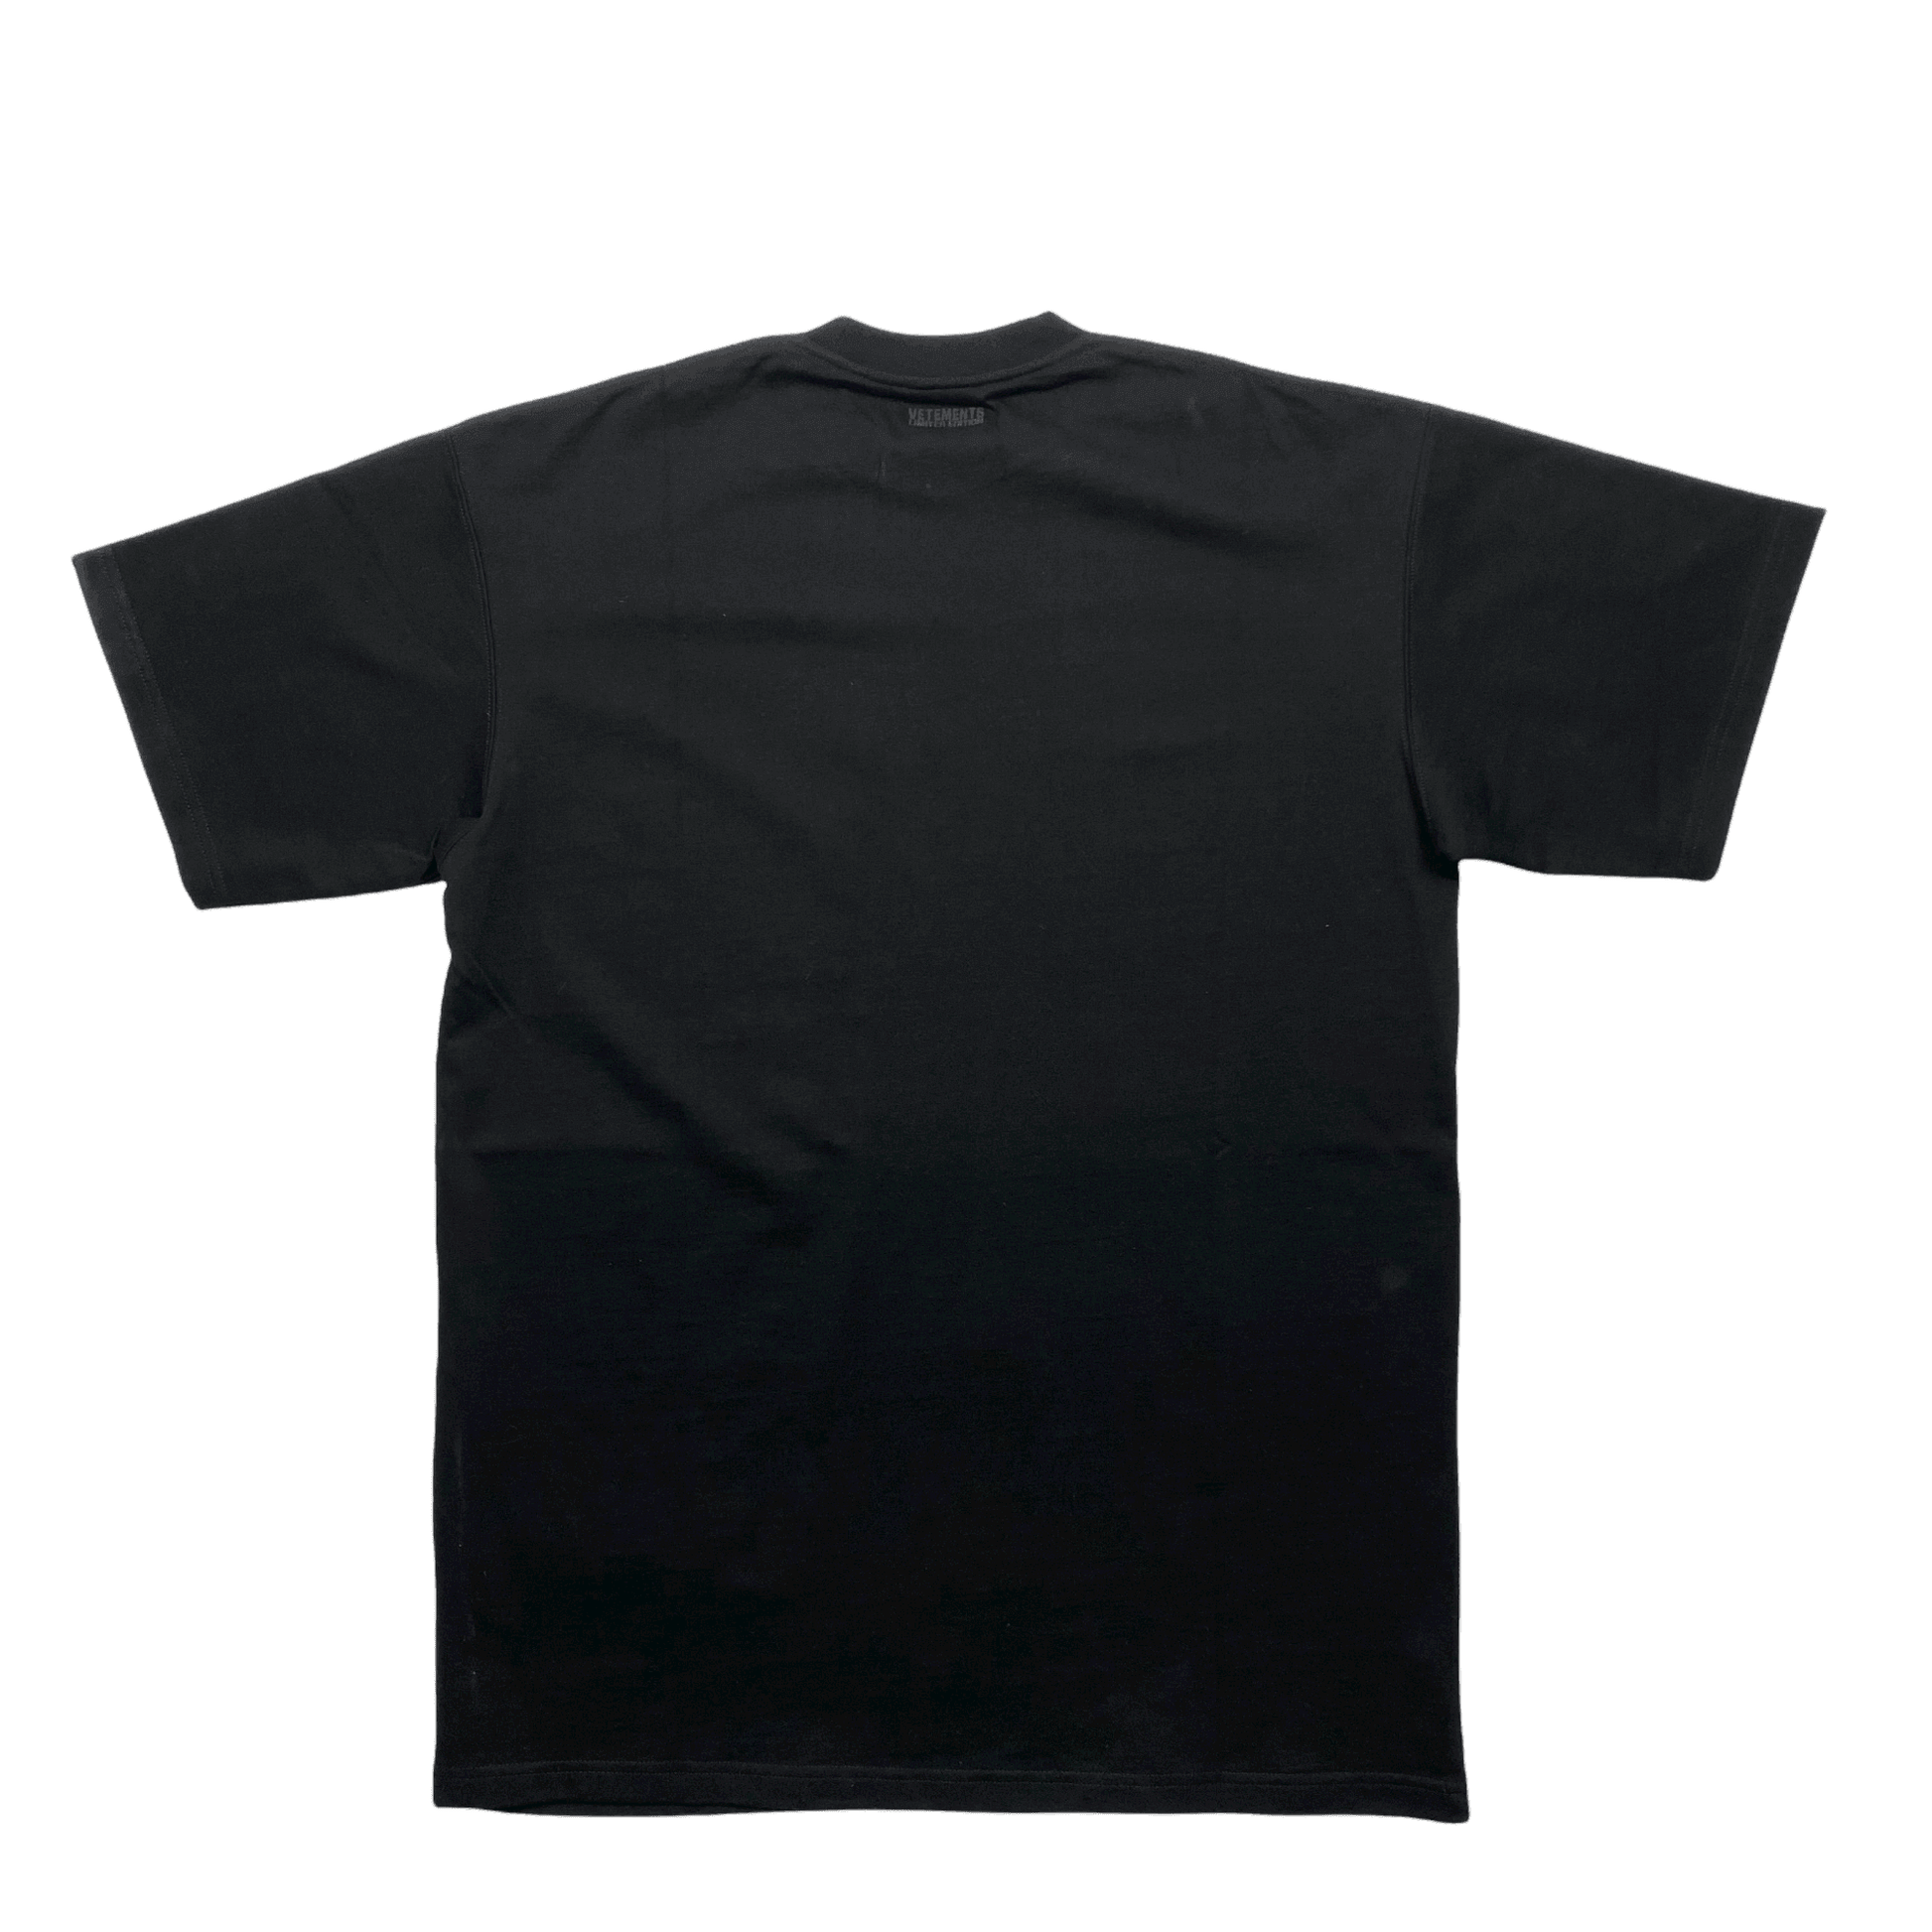 Black Vetements Oversized Sweet Logo Tee - Extra Small (Recommended Size - Extra Large) - The Streetwear Studio